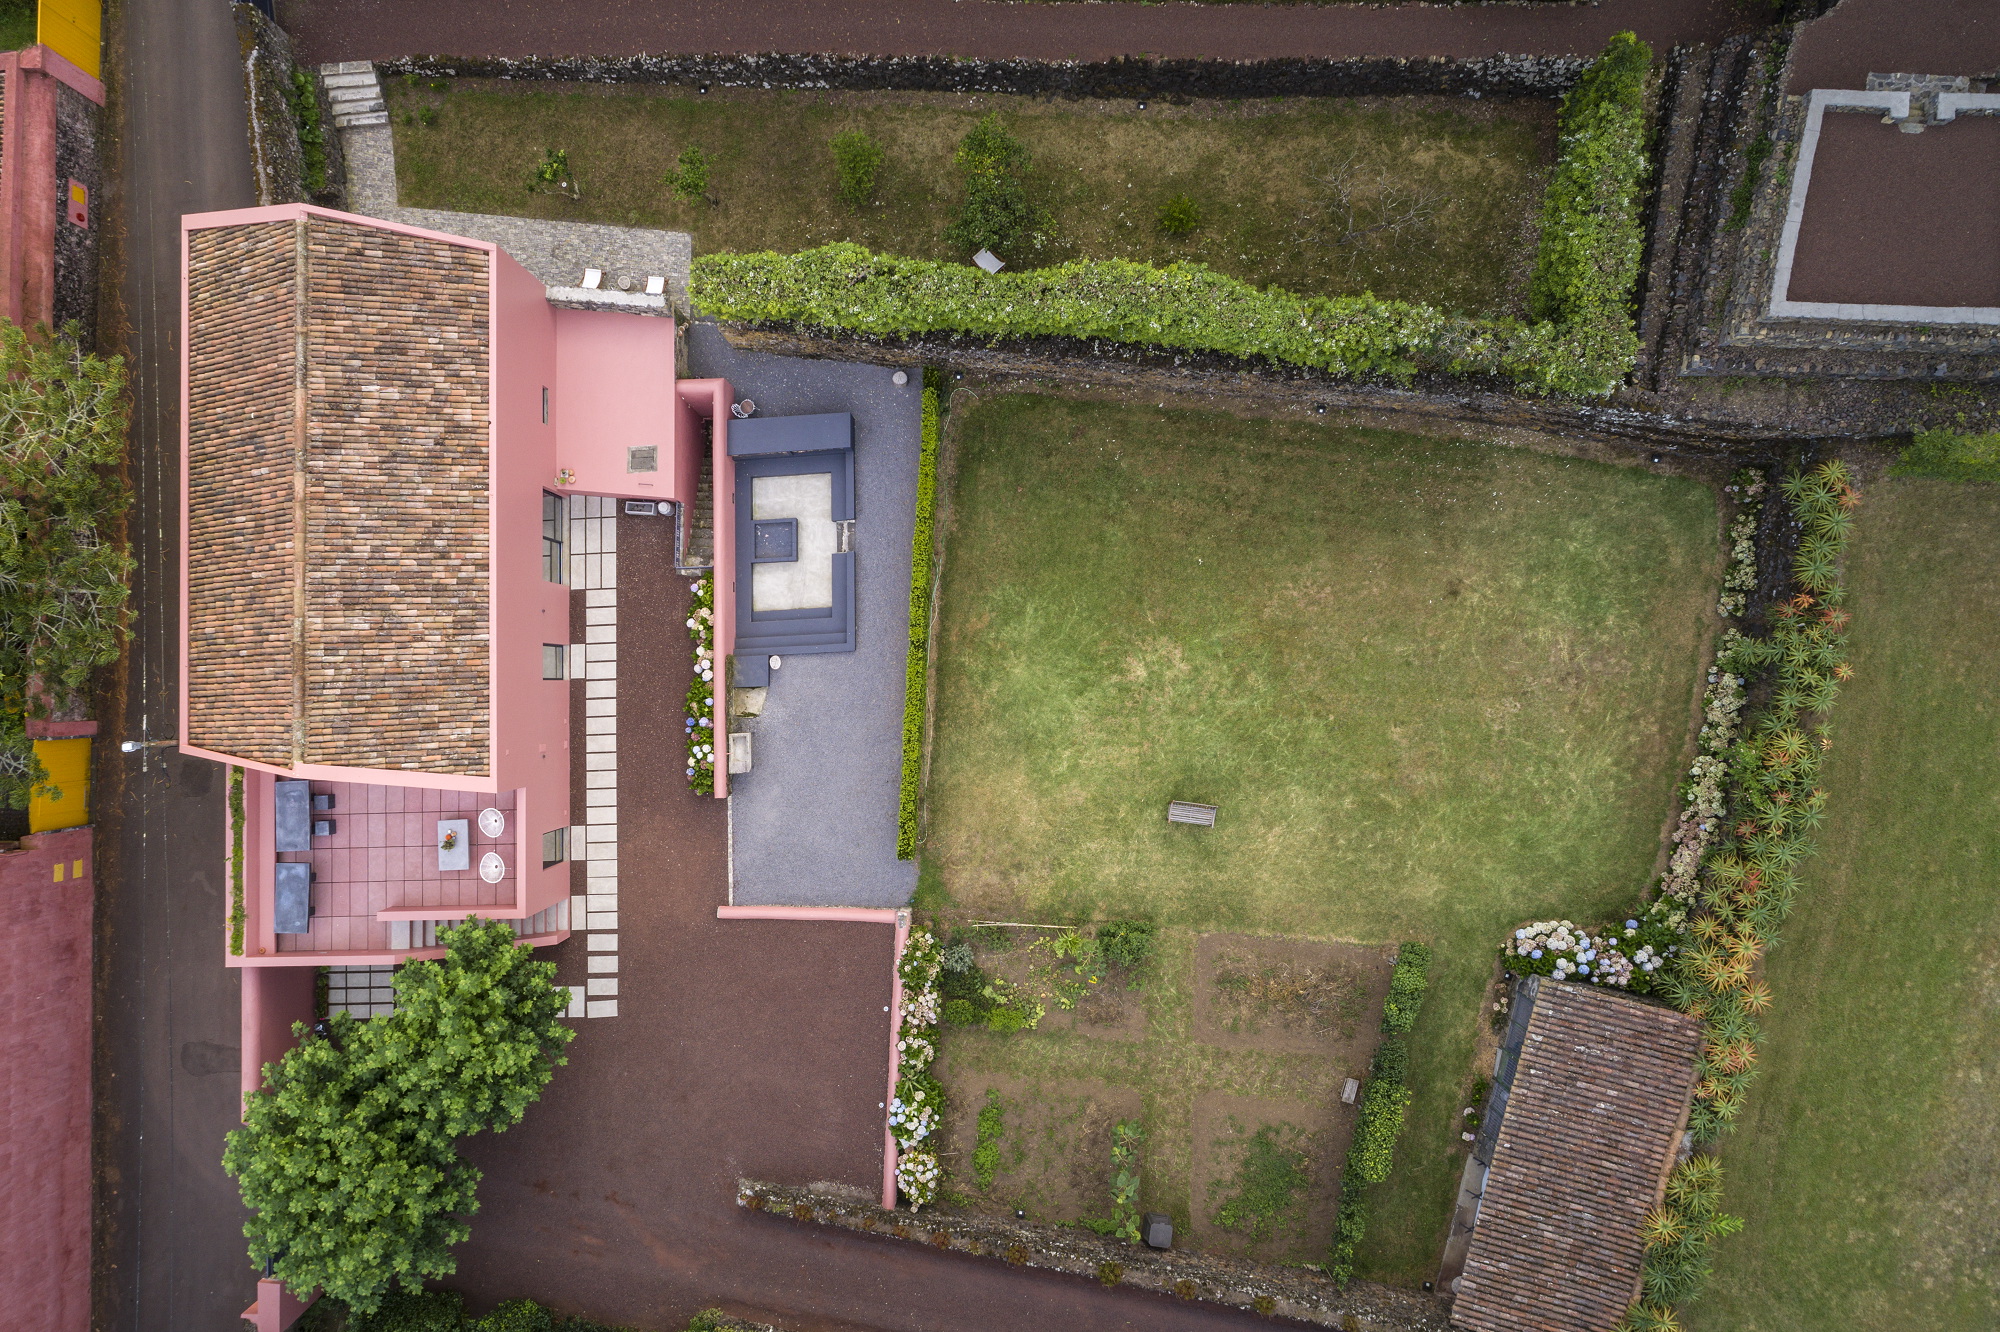 Azores Hotels | Pink House Sao Miguel Azores